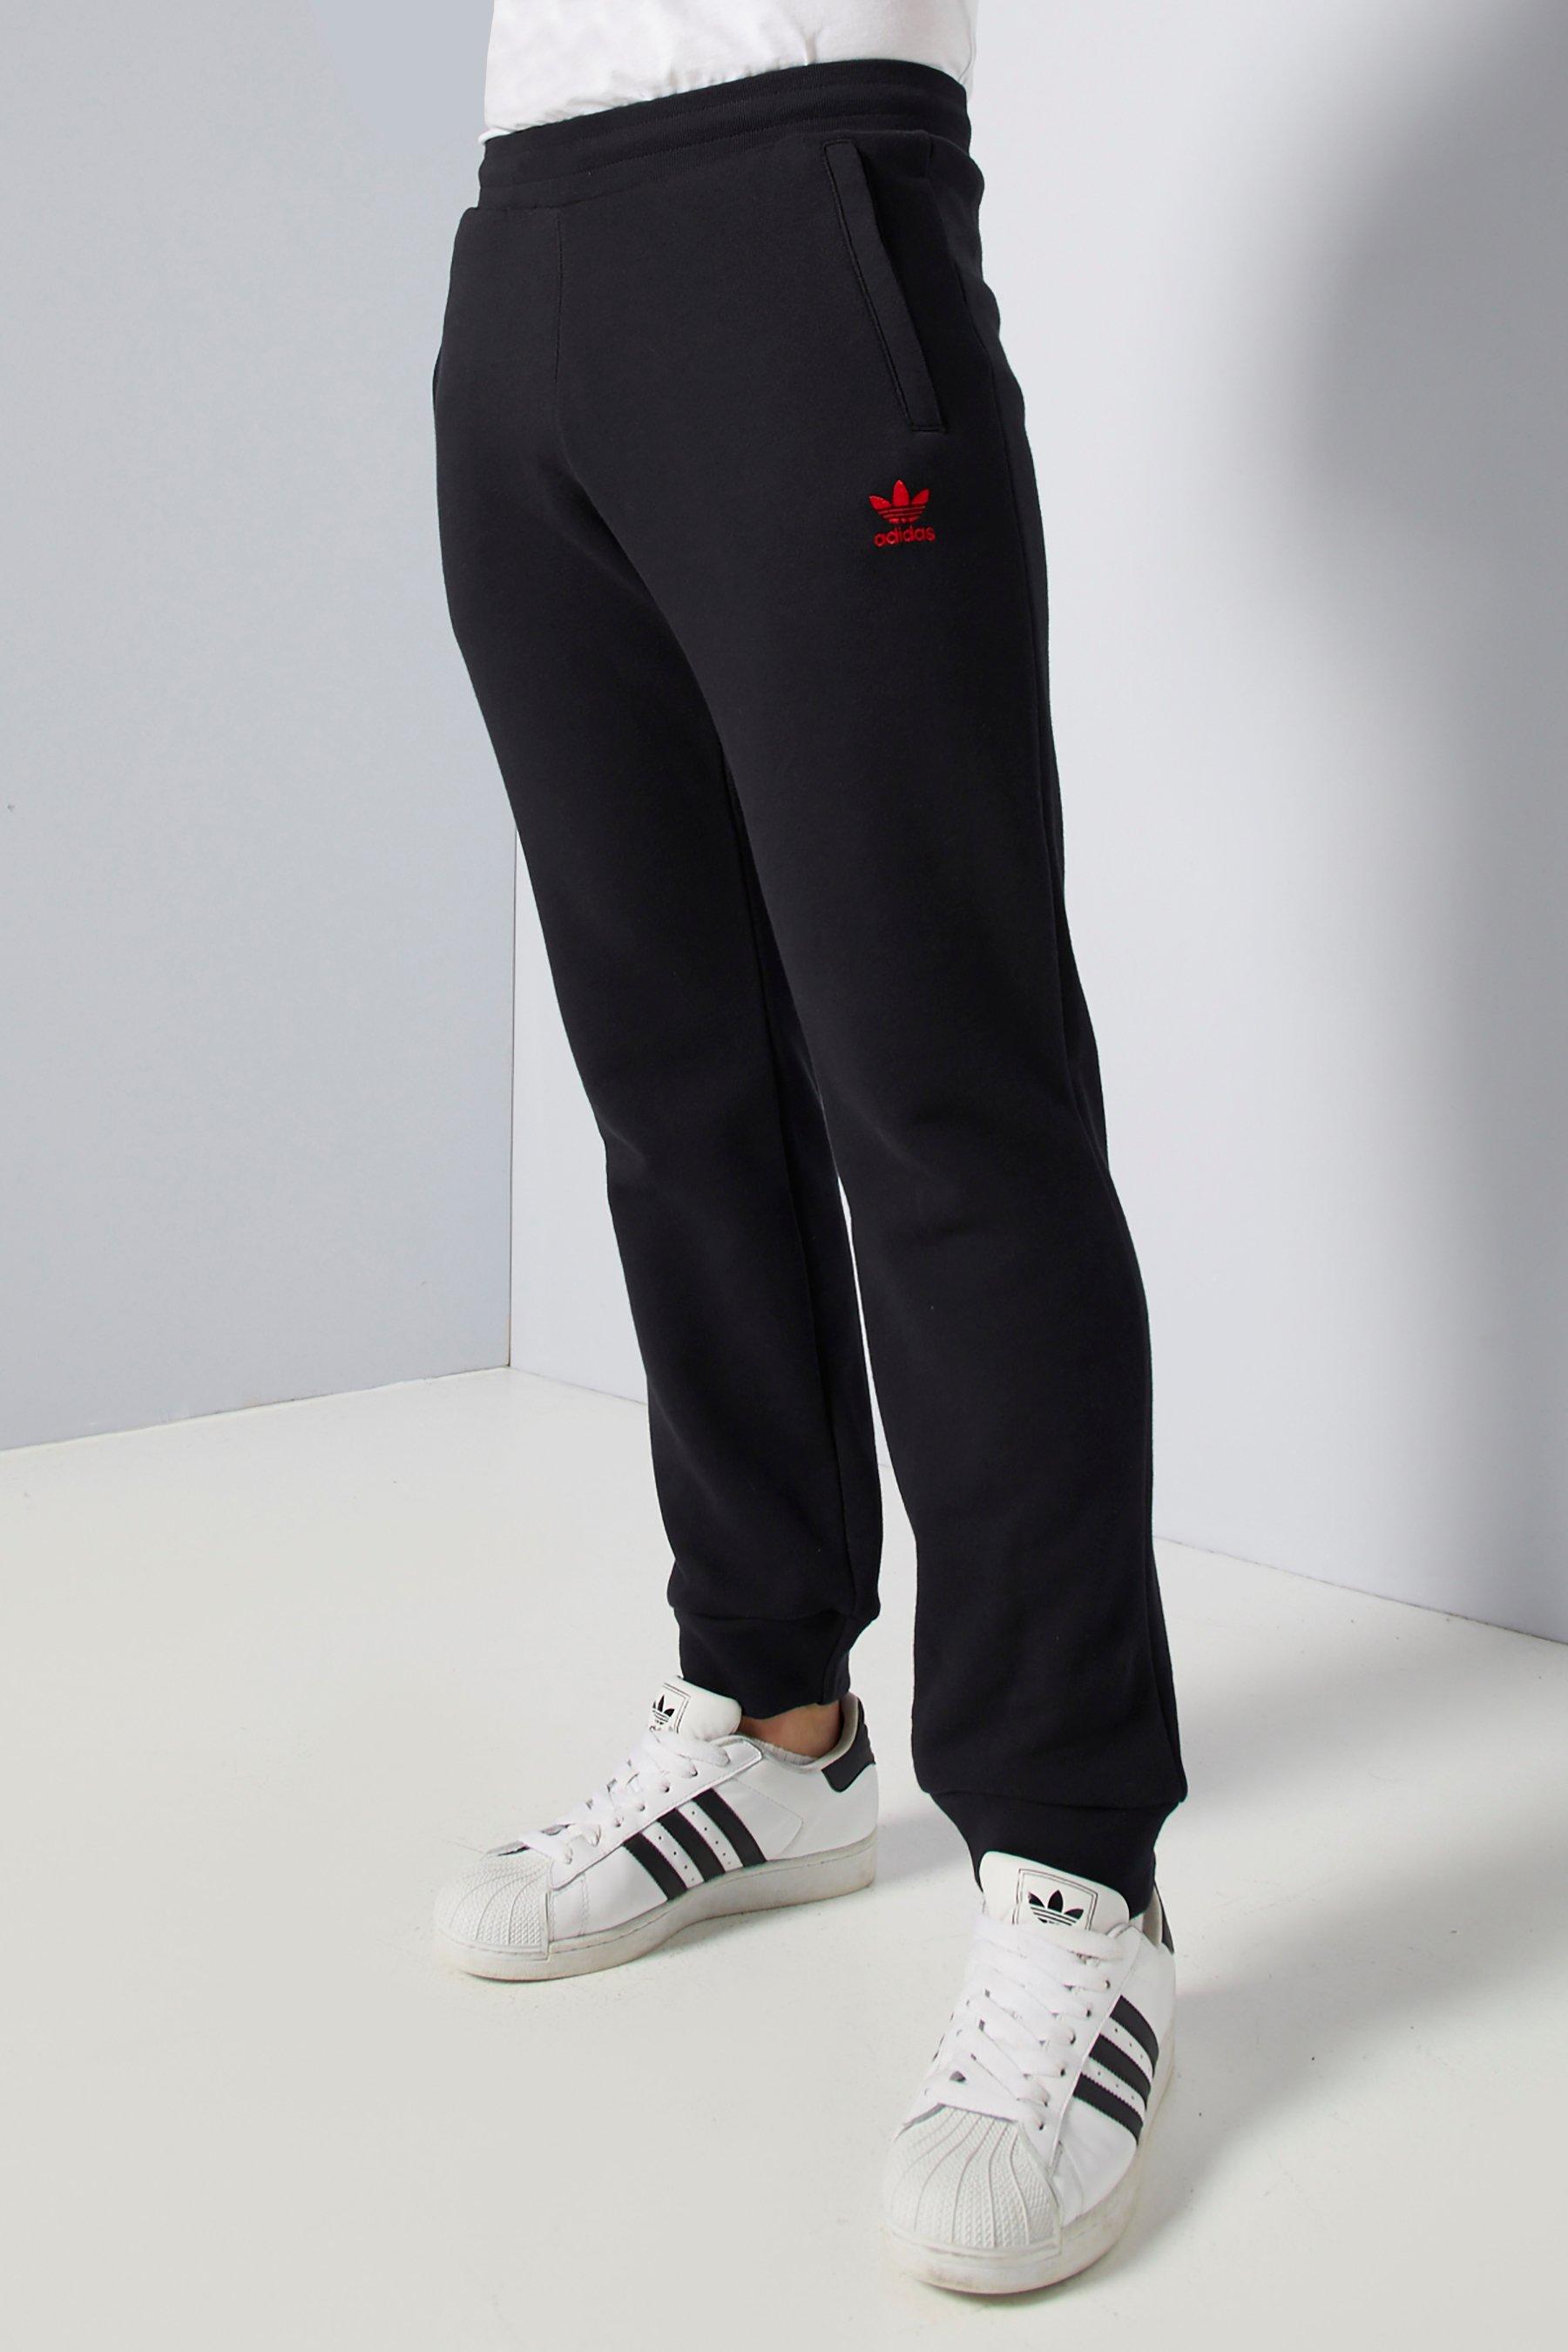 adidas black and red joggers